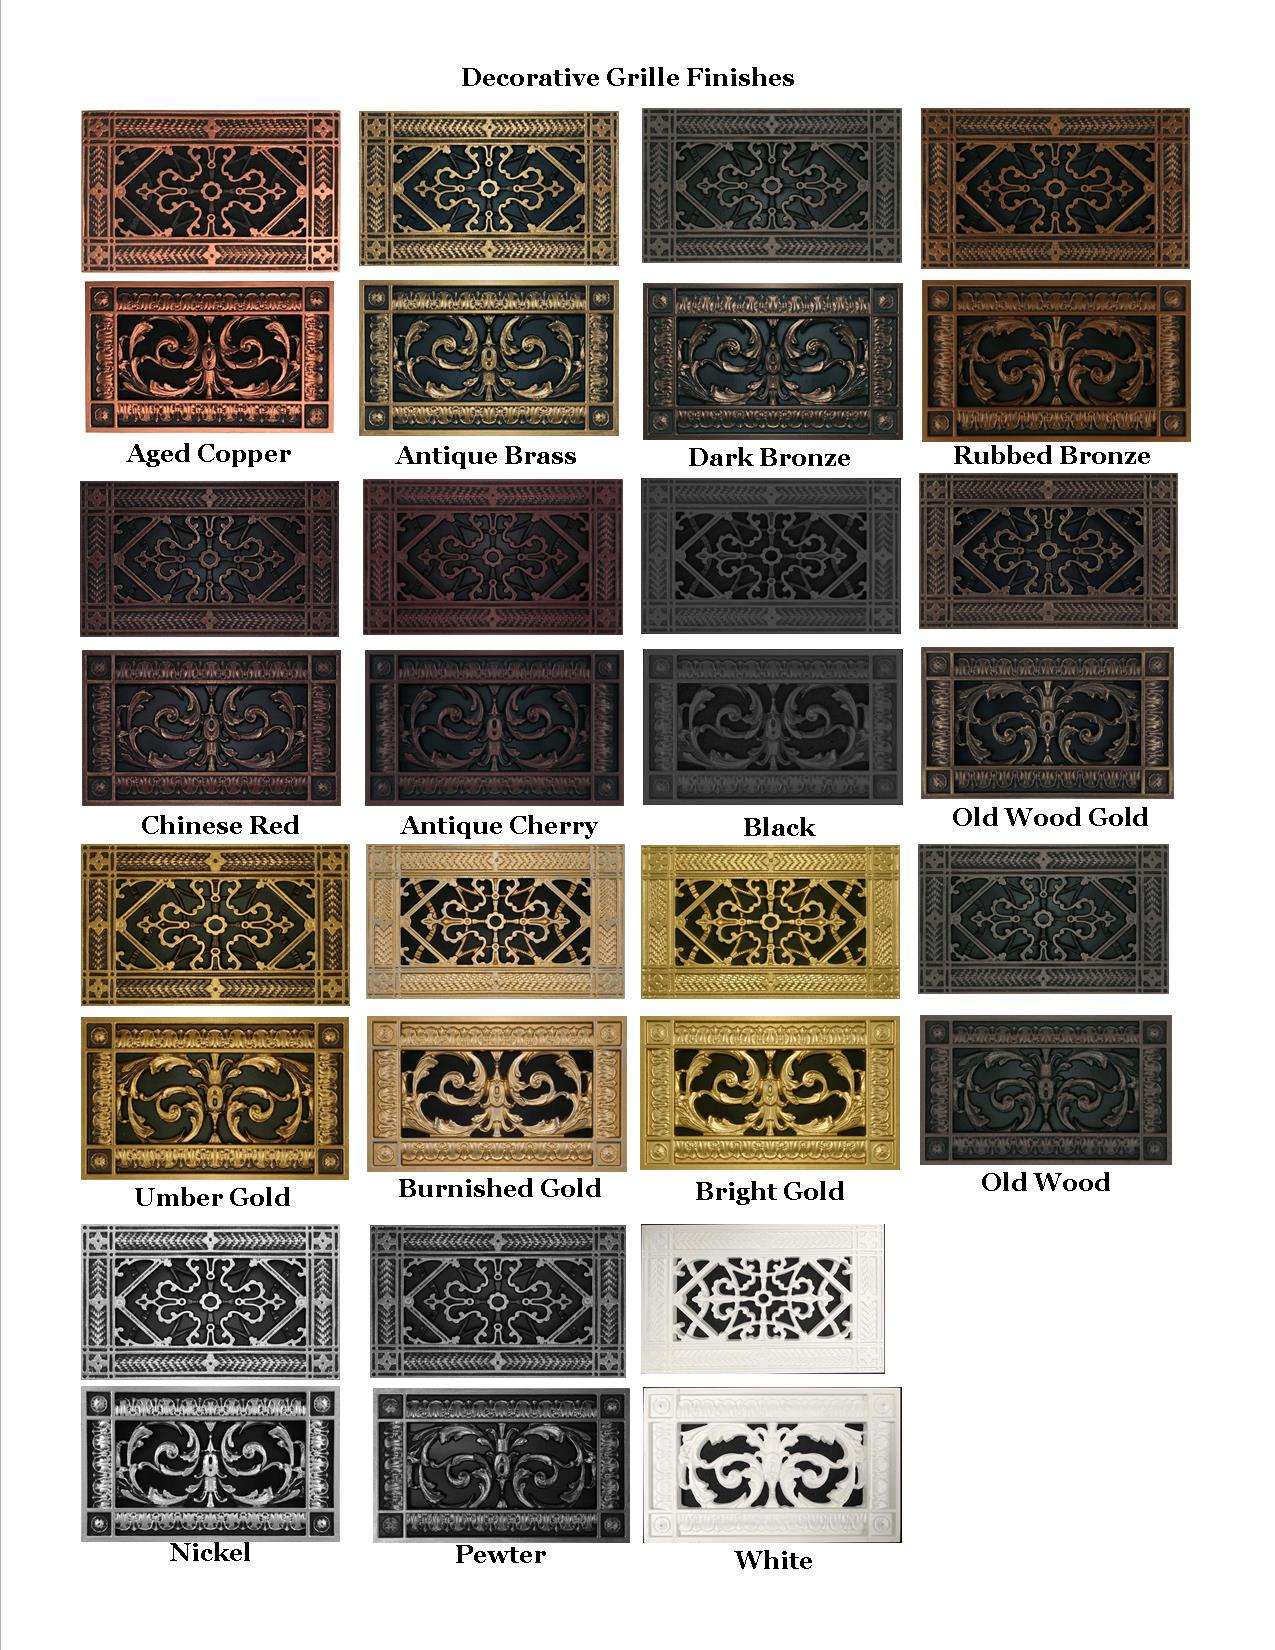 Decorative Grille Finishes.